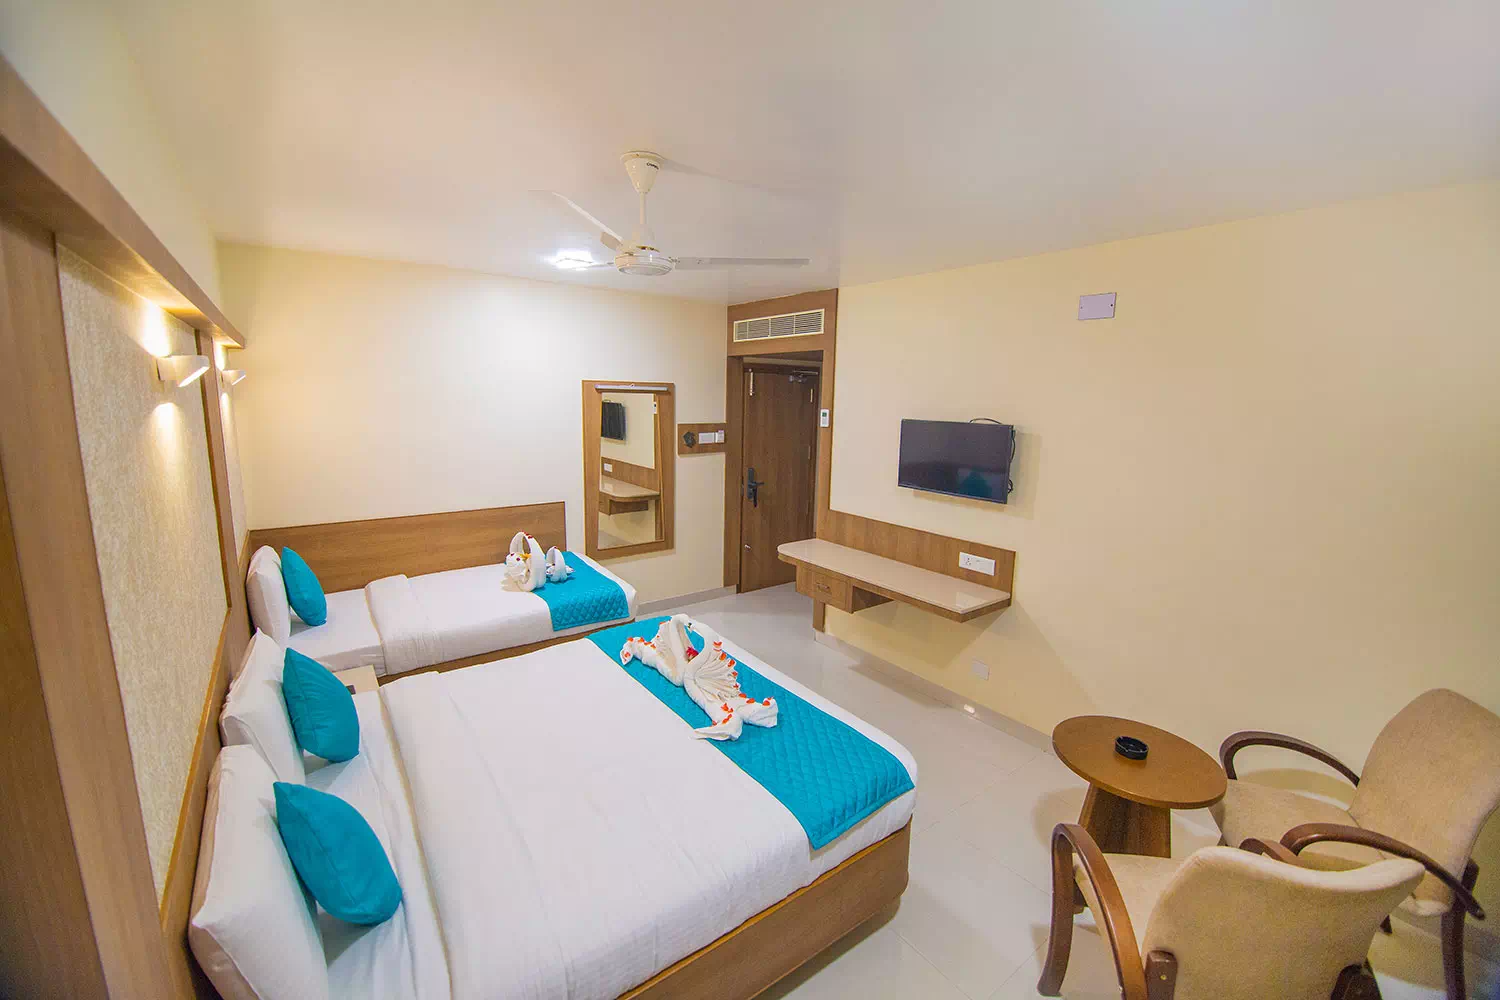 3 star hotels in coimbatore